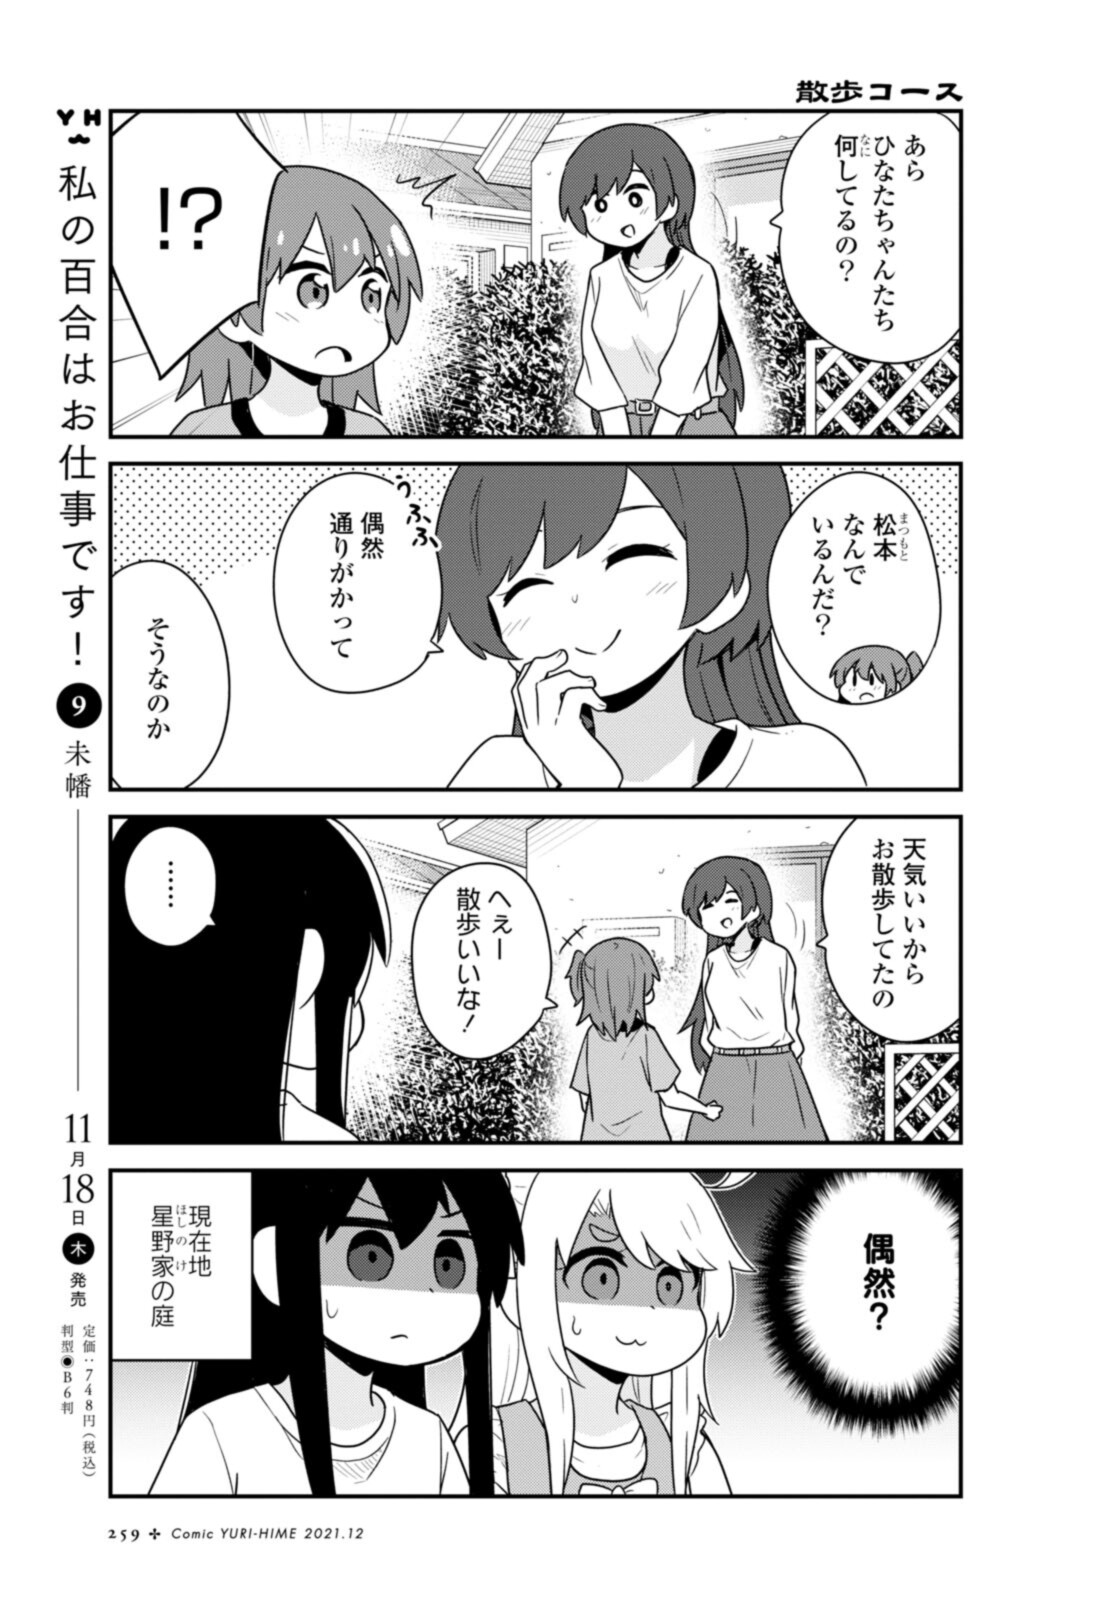 Wataten! An Angel Flew Down to Me 私に天使が舞い降りた！ 第90話 - Page 7